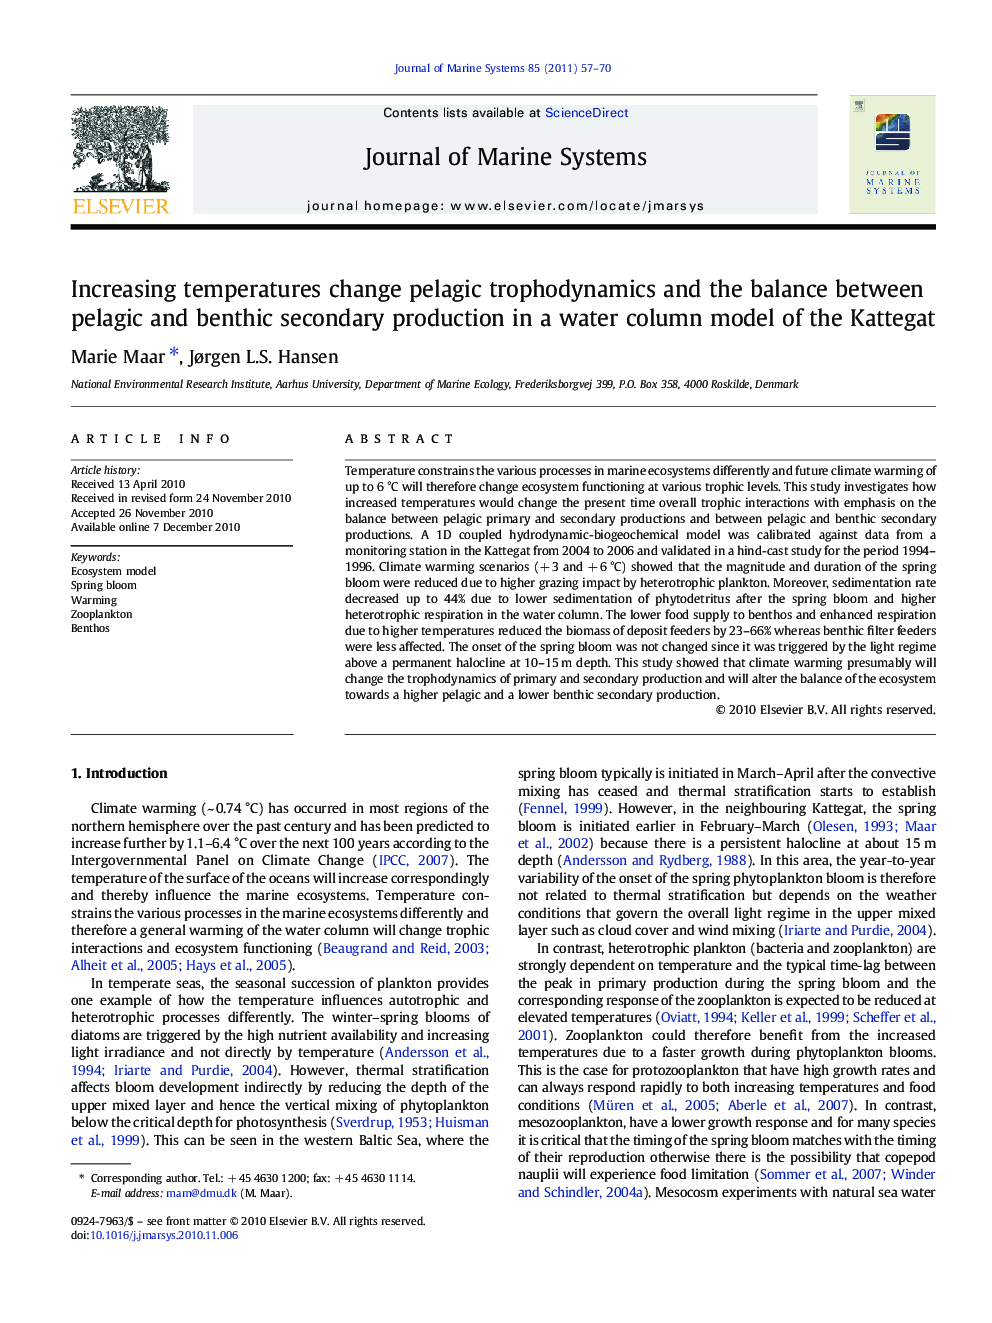 Increasing temperatures change pelagic trophodynamics and the balance between pelagic and benthic secondary production in a water column model of the Kattegat